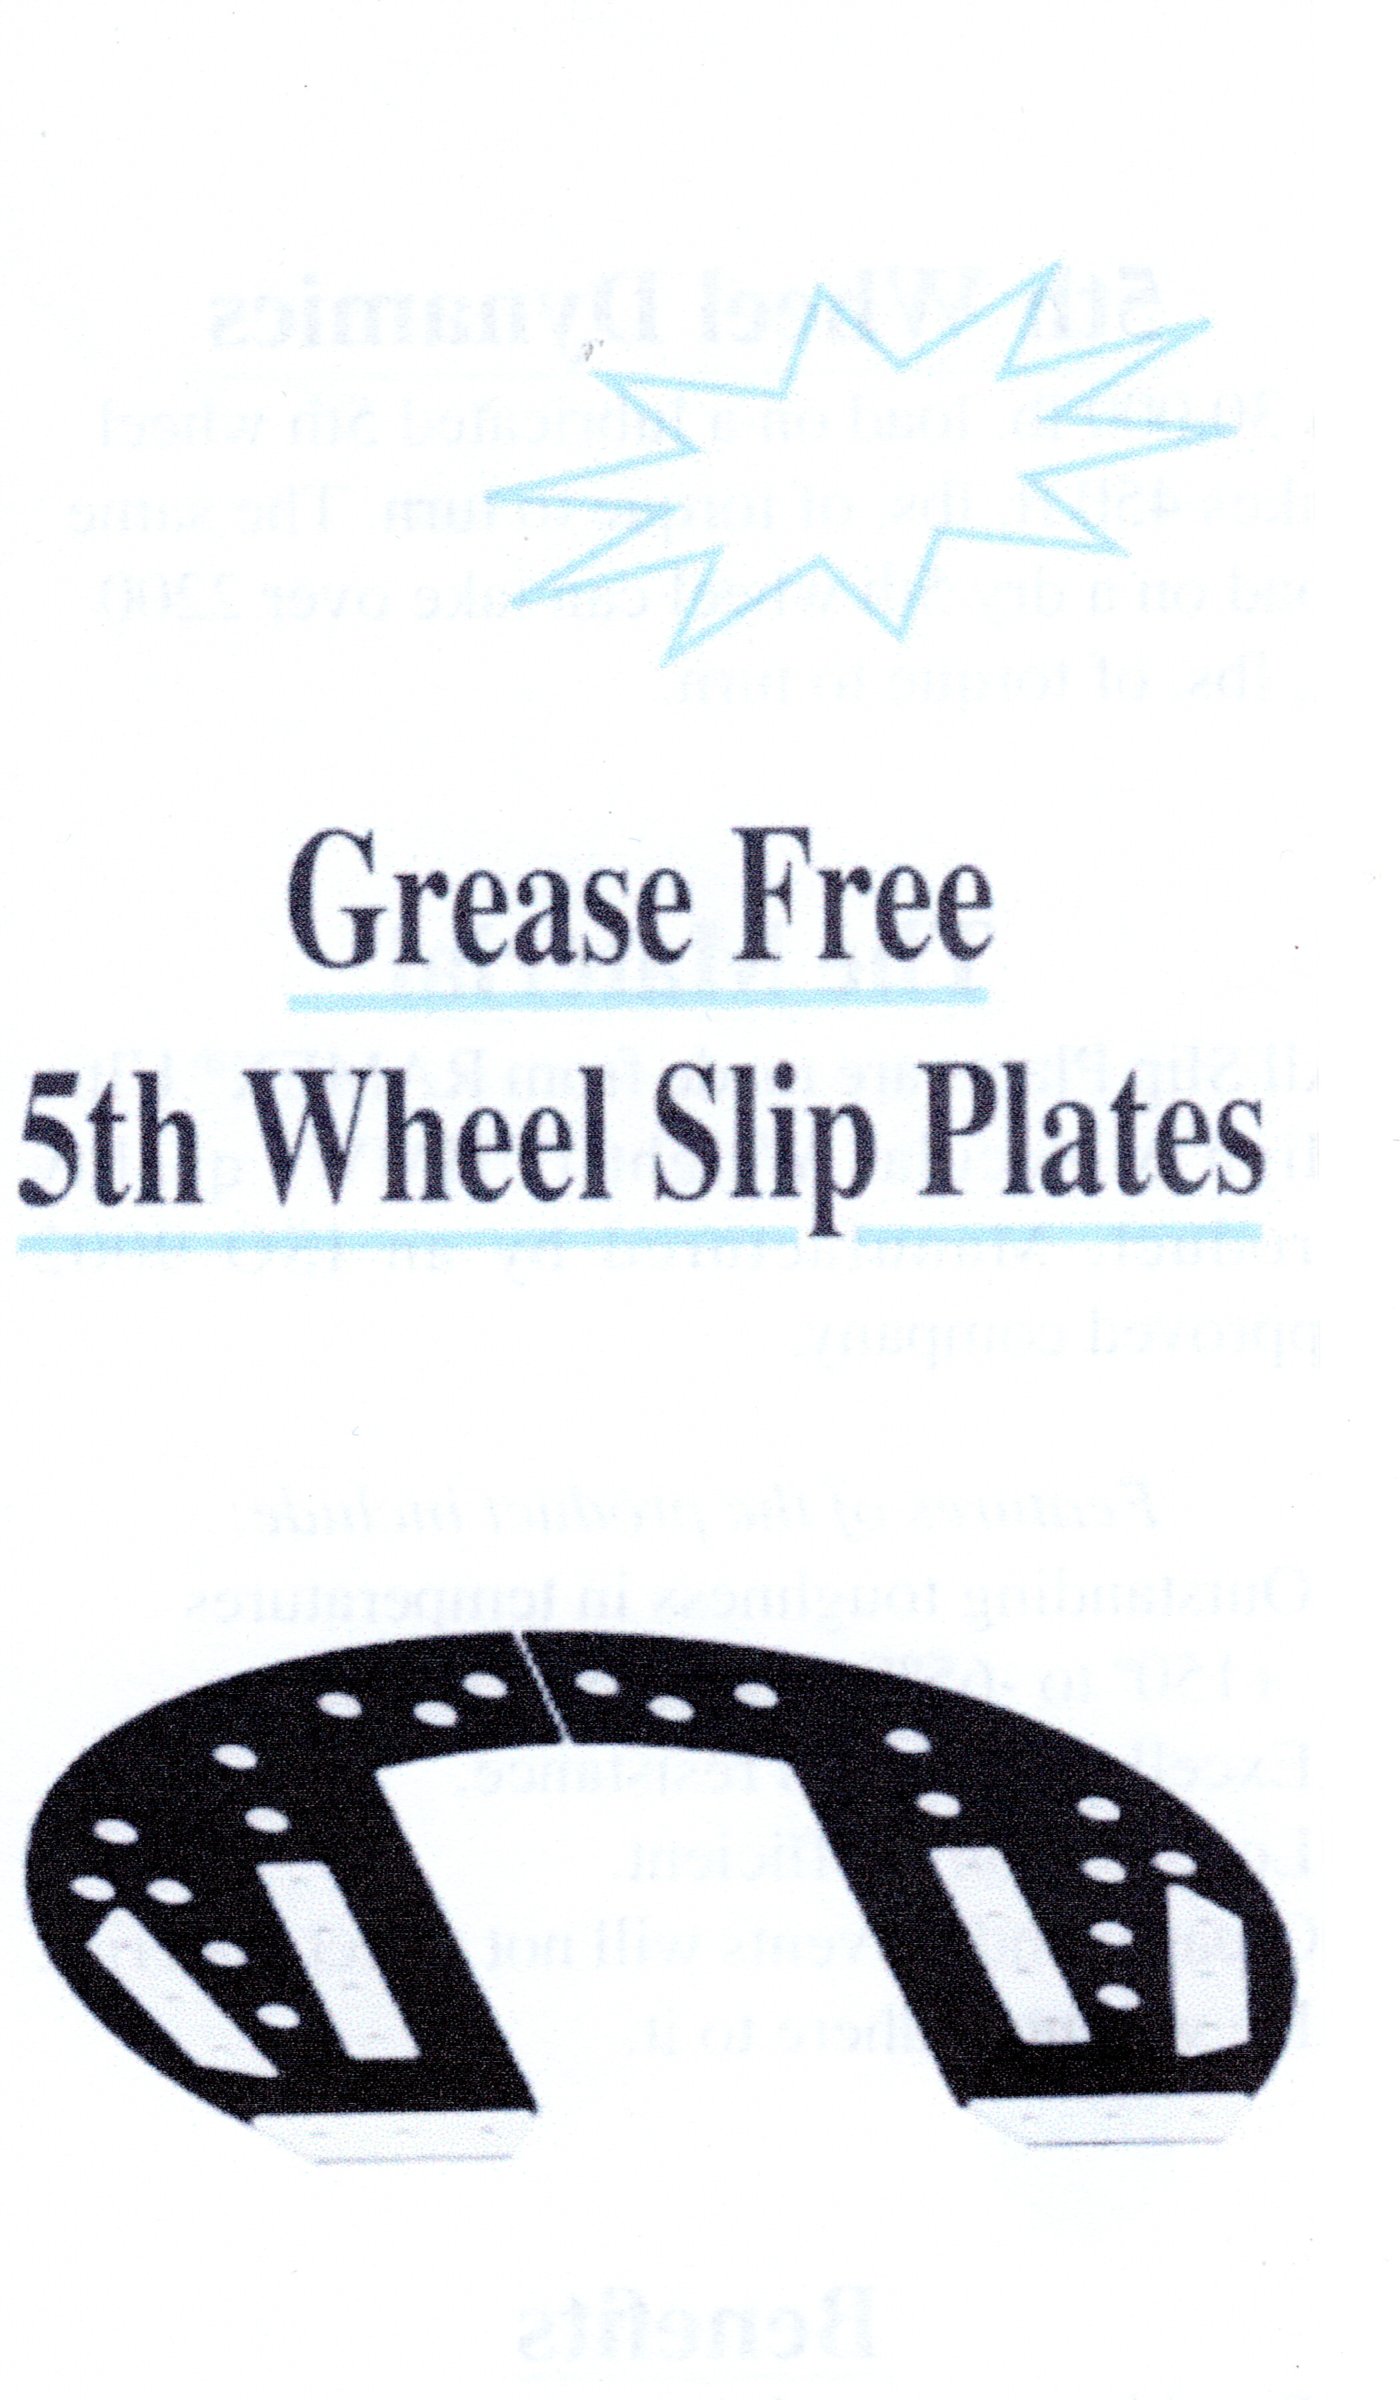 grease free slip plate image